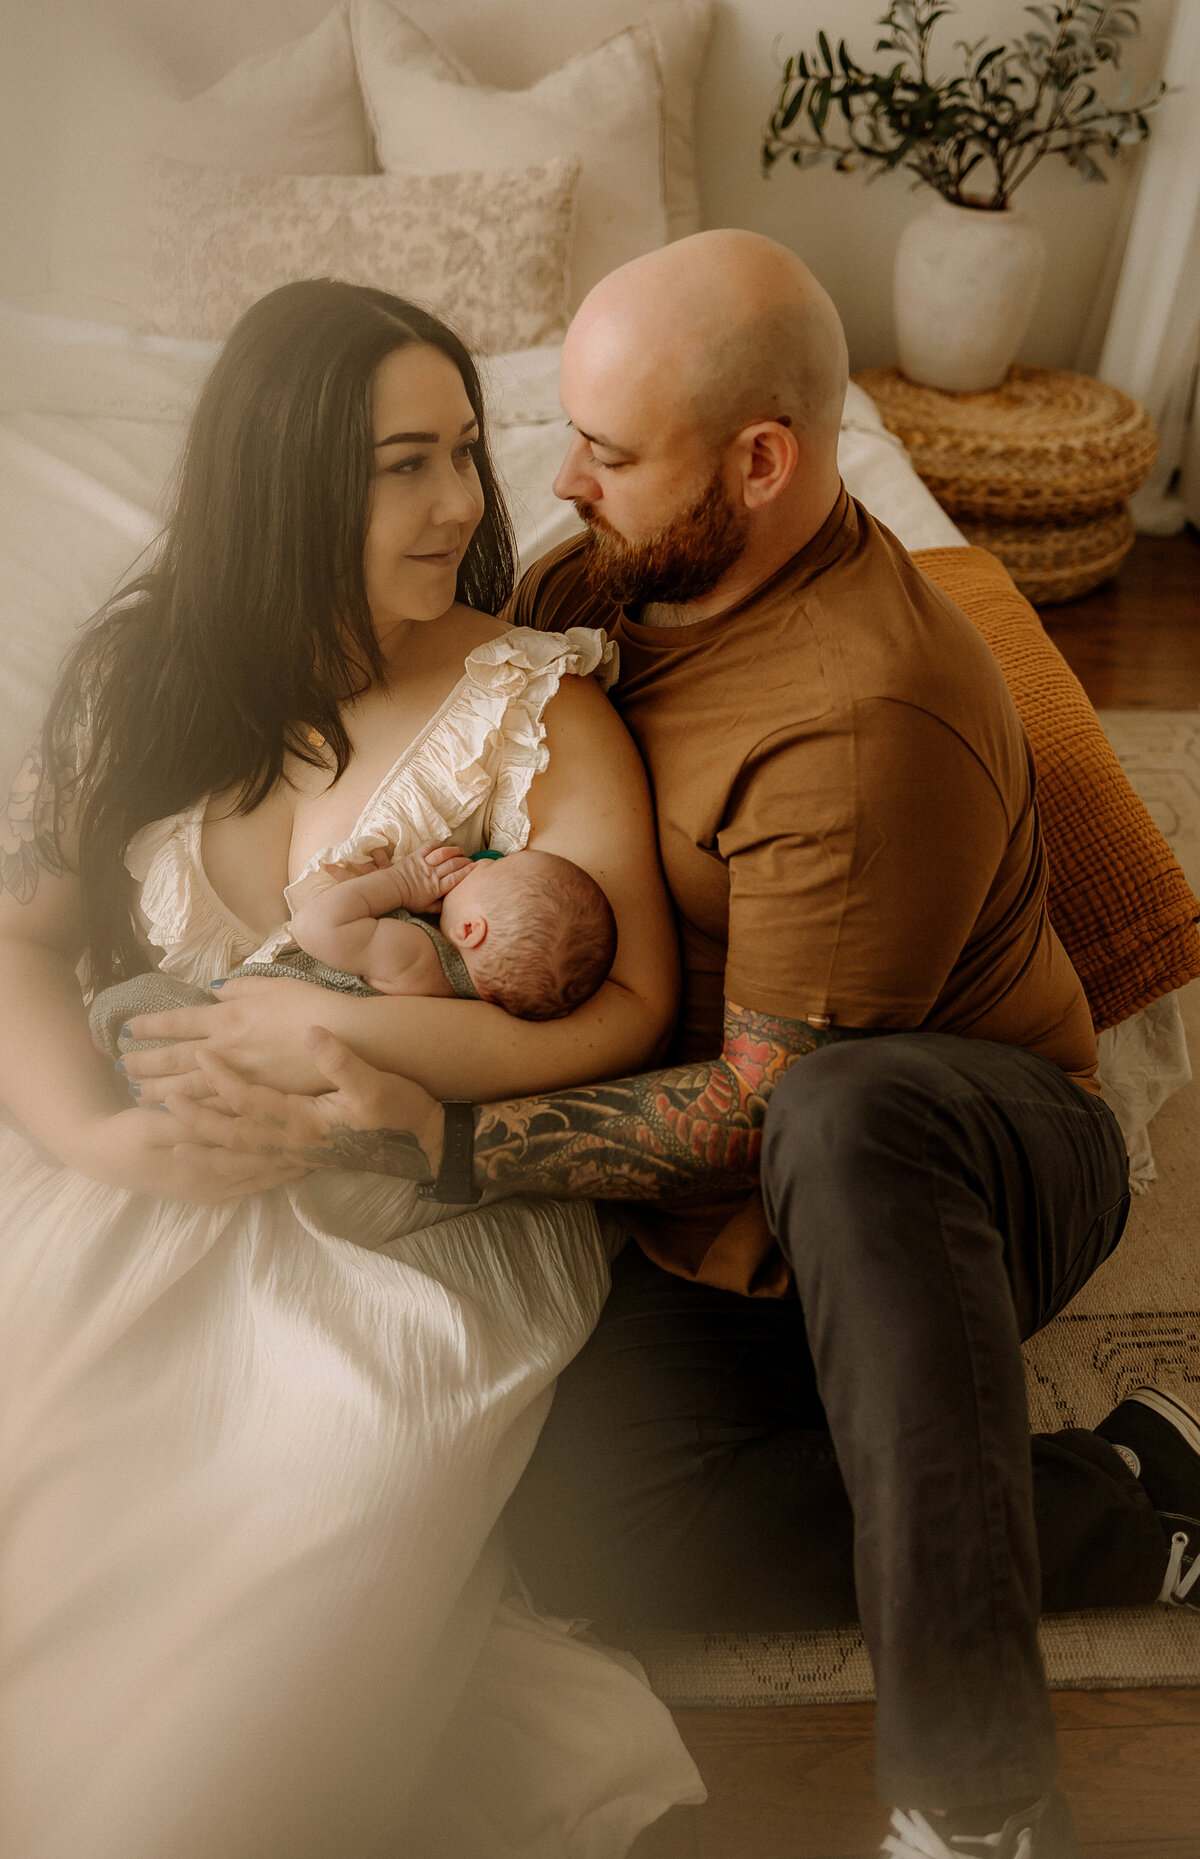 My newborn artistry in Calgary creates precious memories that highlight the tenderness, love, and purity of your baby's early days. Let's capture this special time.